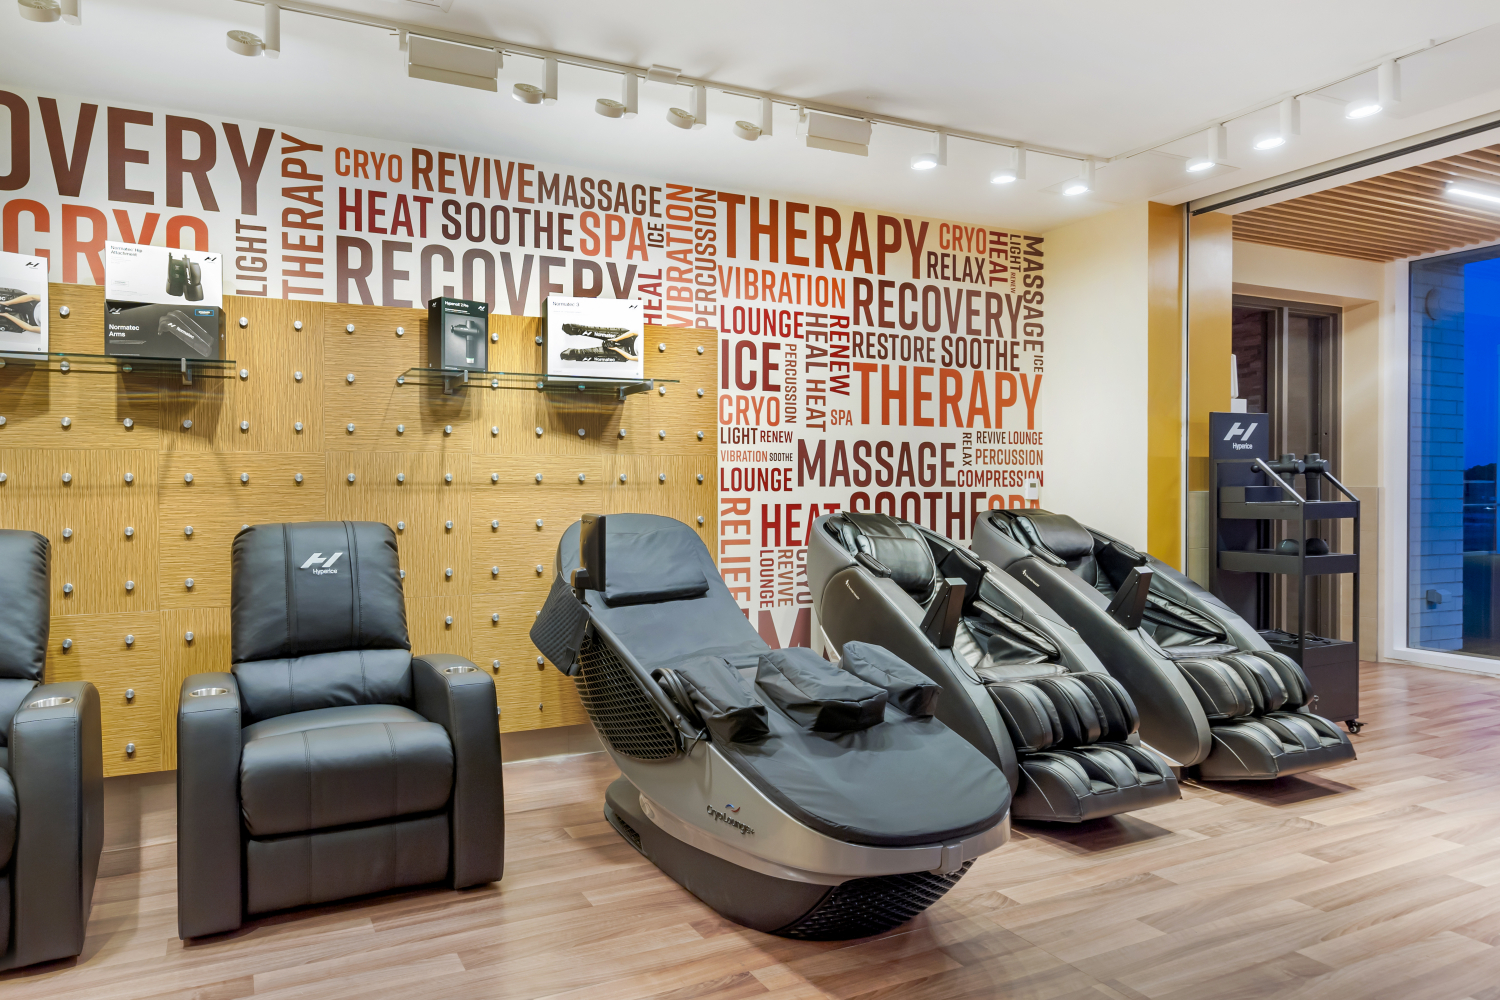 recovery lounge in best gym in elmhurst